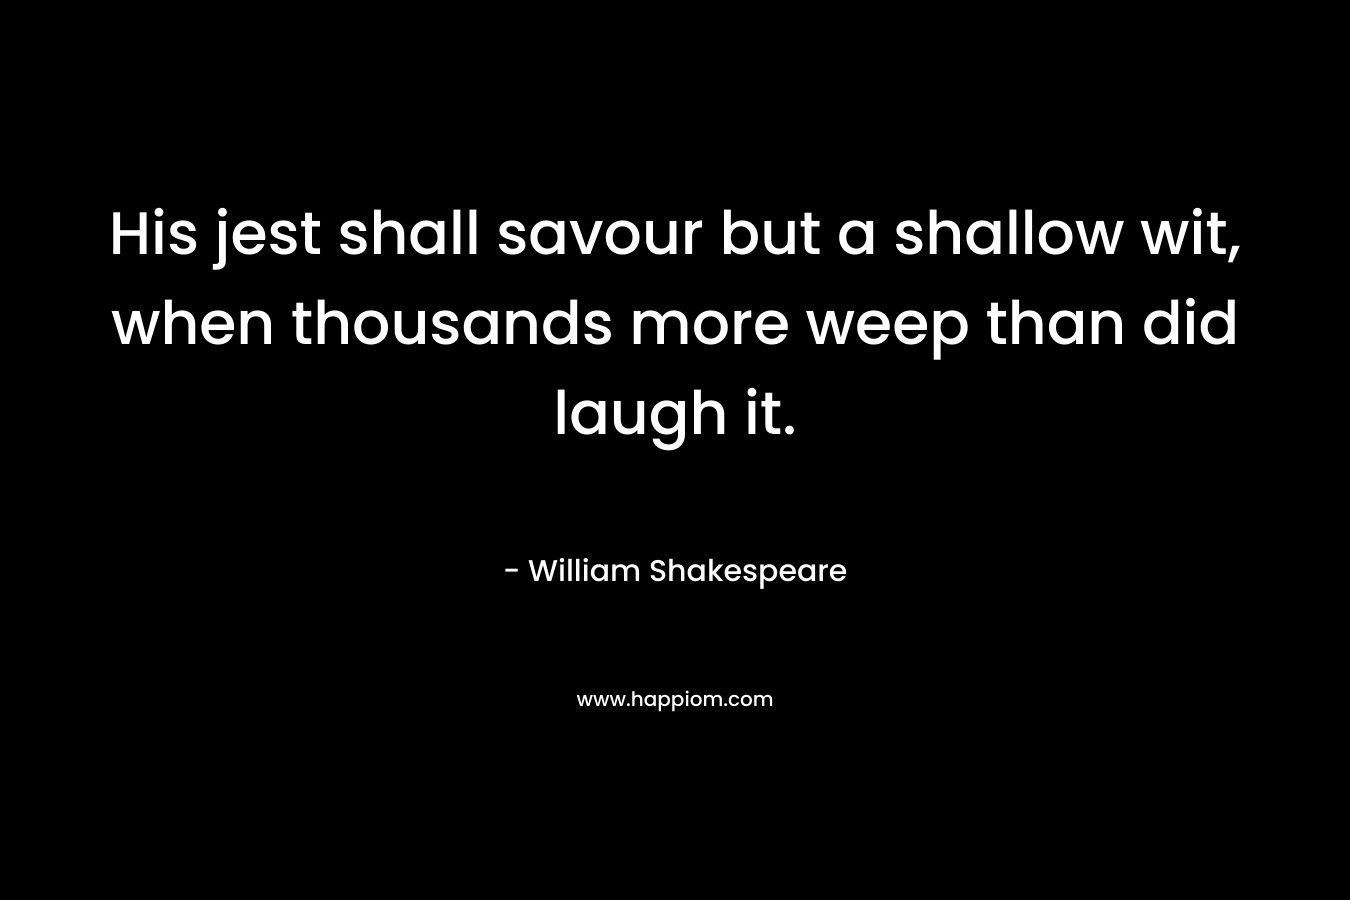 His jest shall savour but a shallow wit, when thousands more weep than did laugh it.